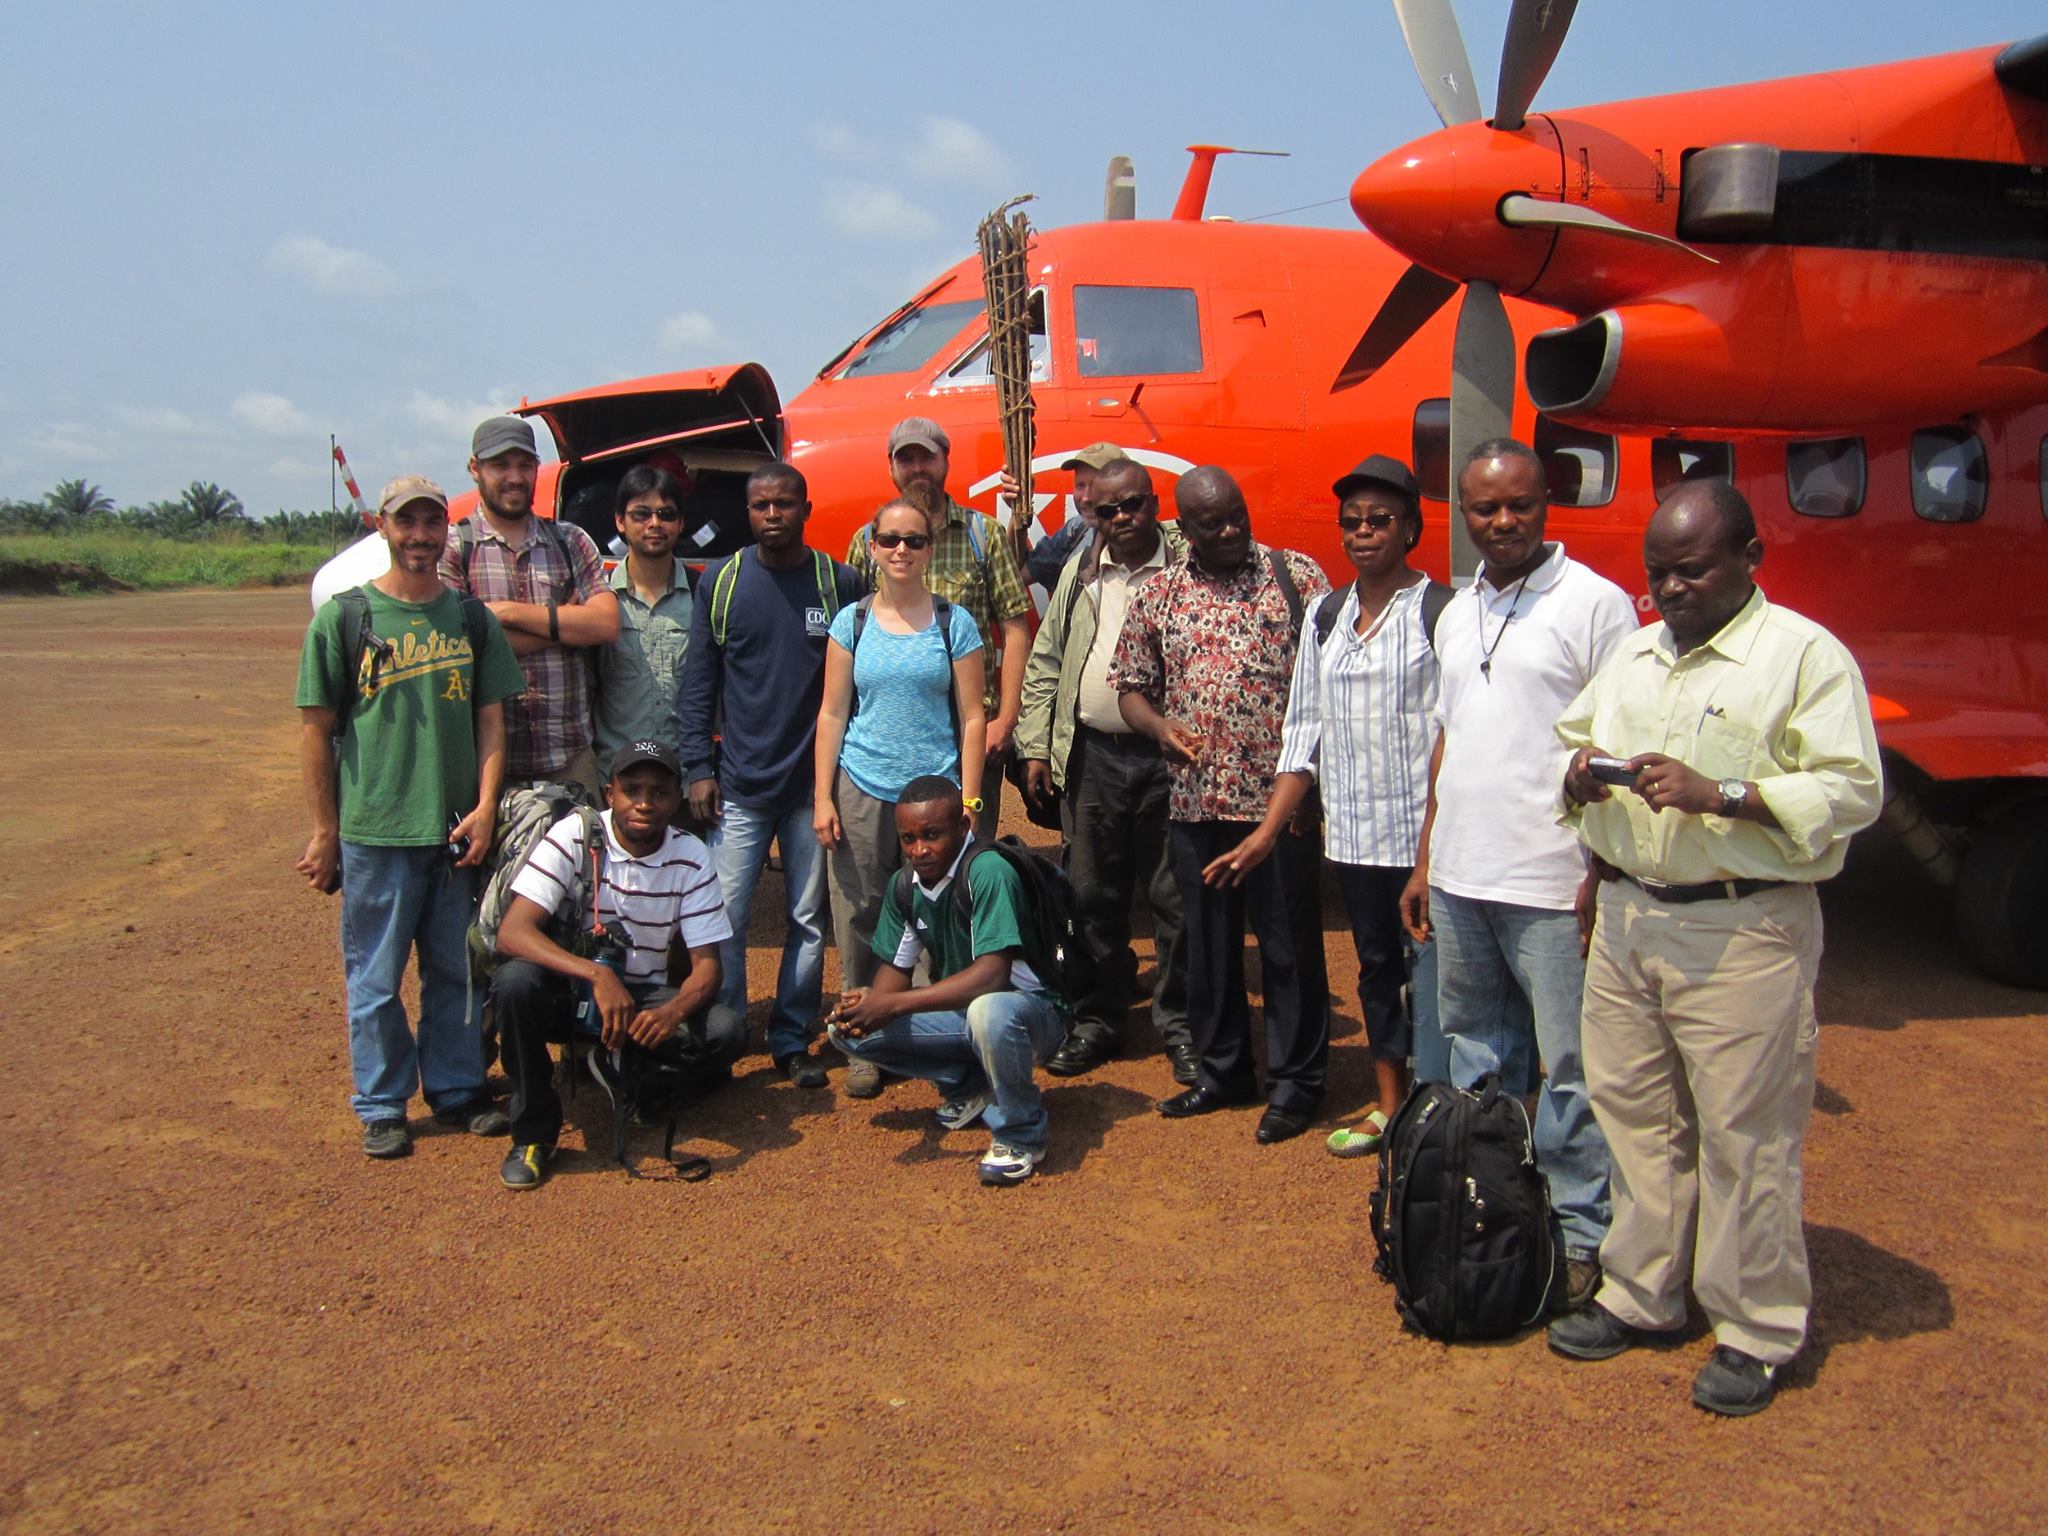 Bill and crew, during fieldwork in the Congo, 2013. That’s Bill in the back, holding a contrivance created for carrying a pangolin skin. Courtesy of the CDC.